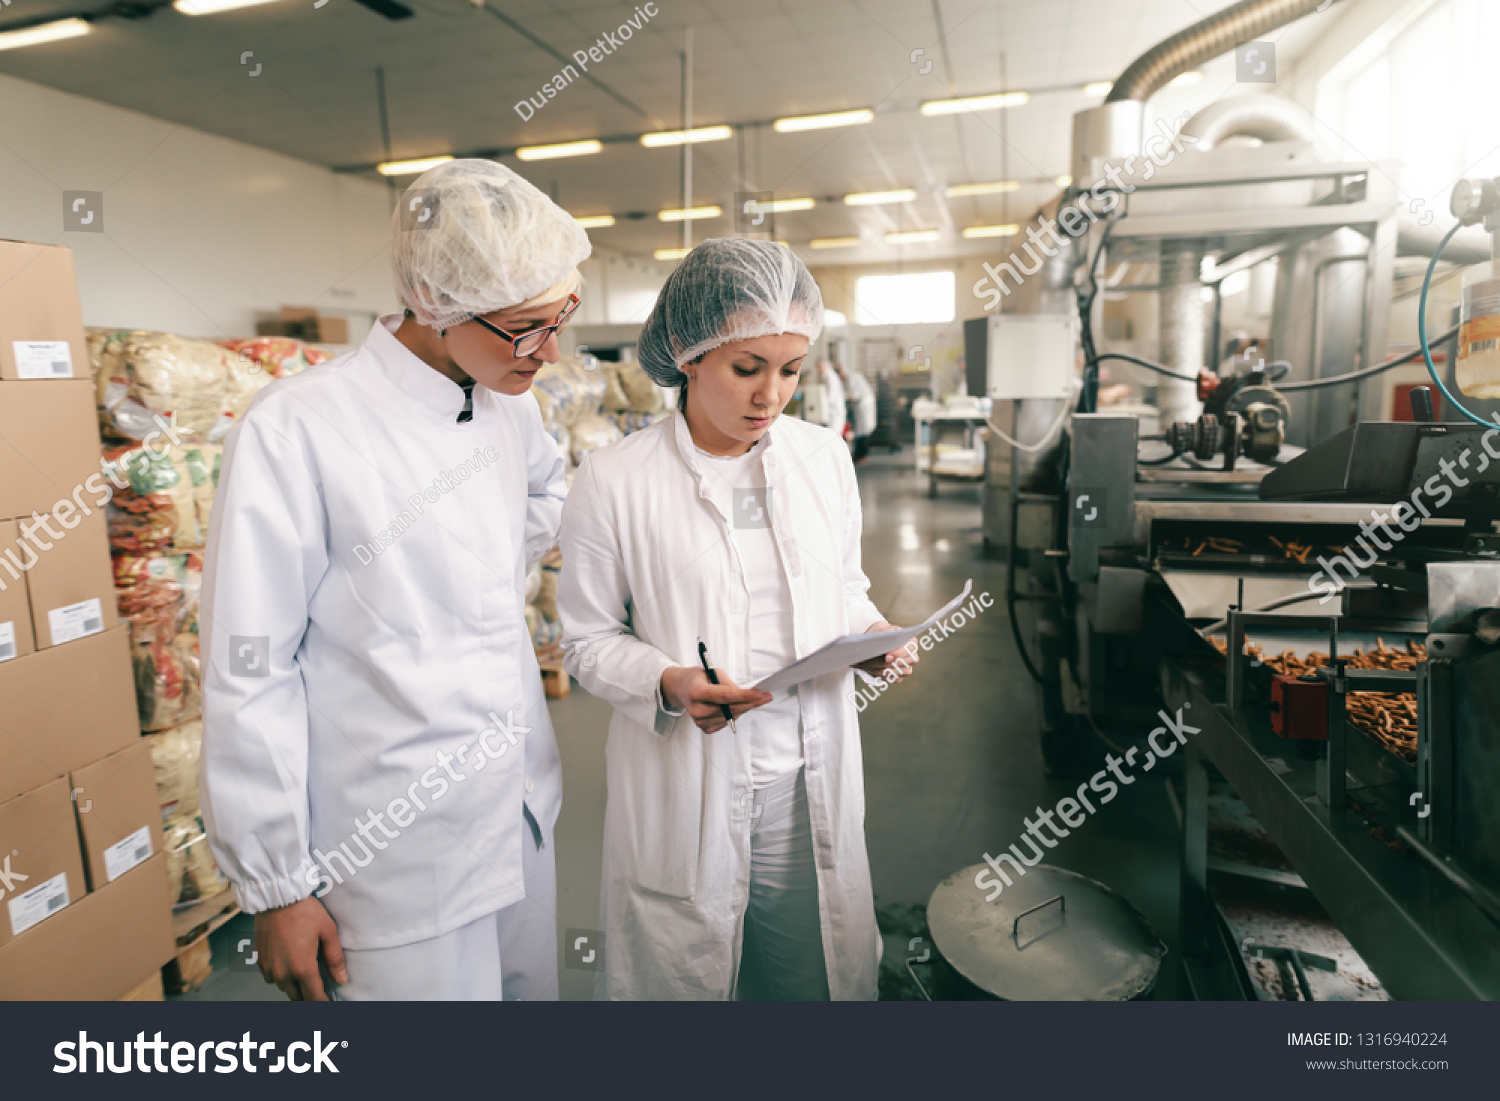 Two quality professionals in white sterile uniforms checking quality of salt sticks while standing in food factory. #1316940224